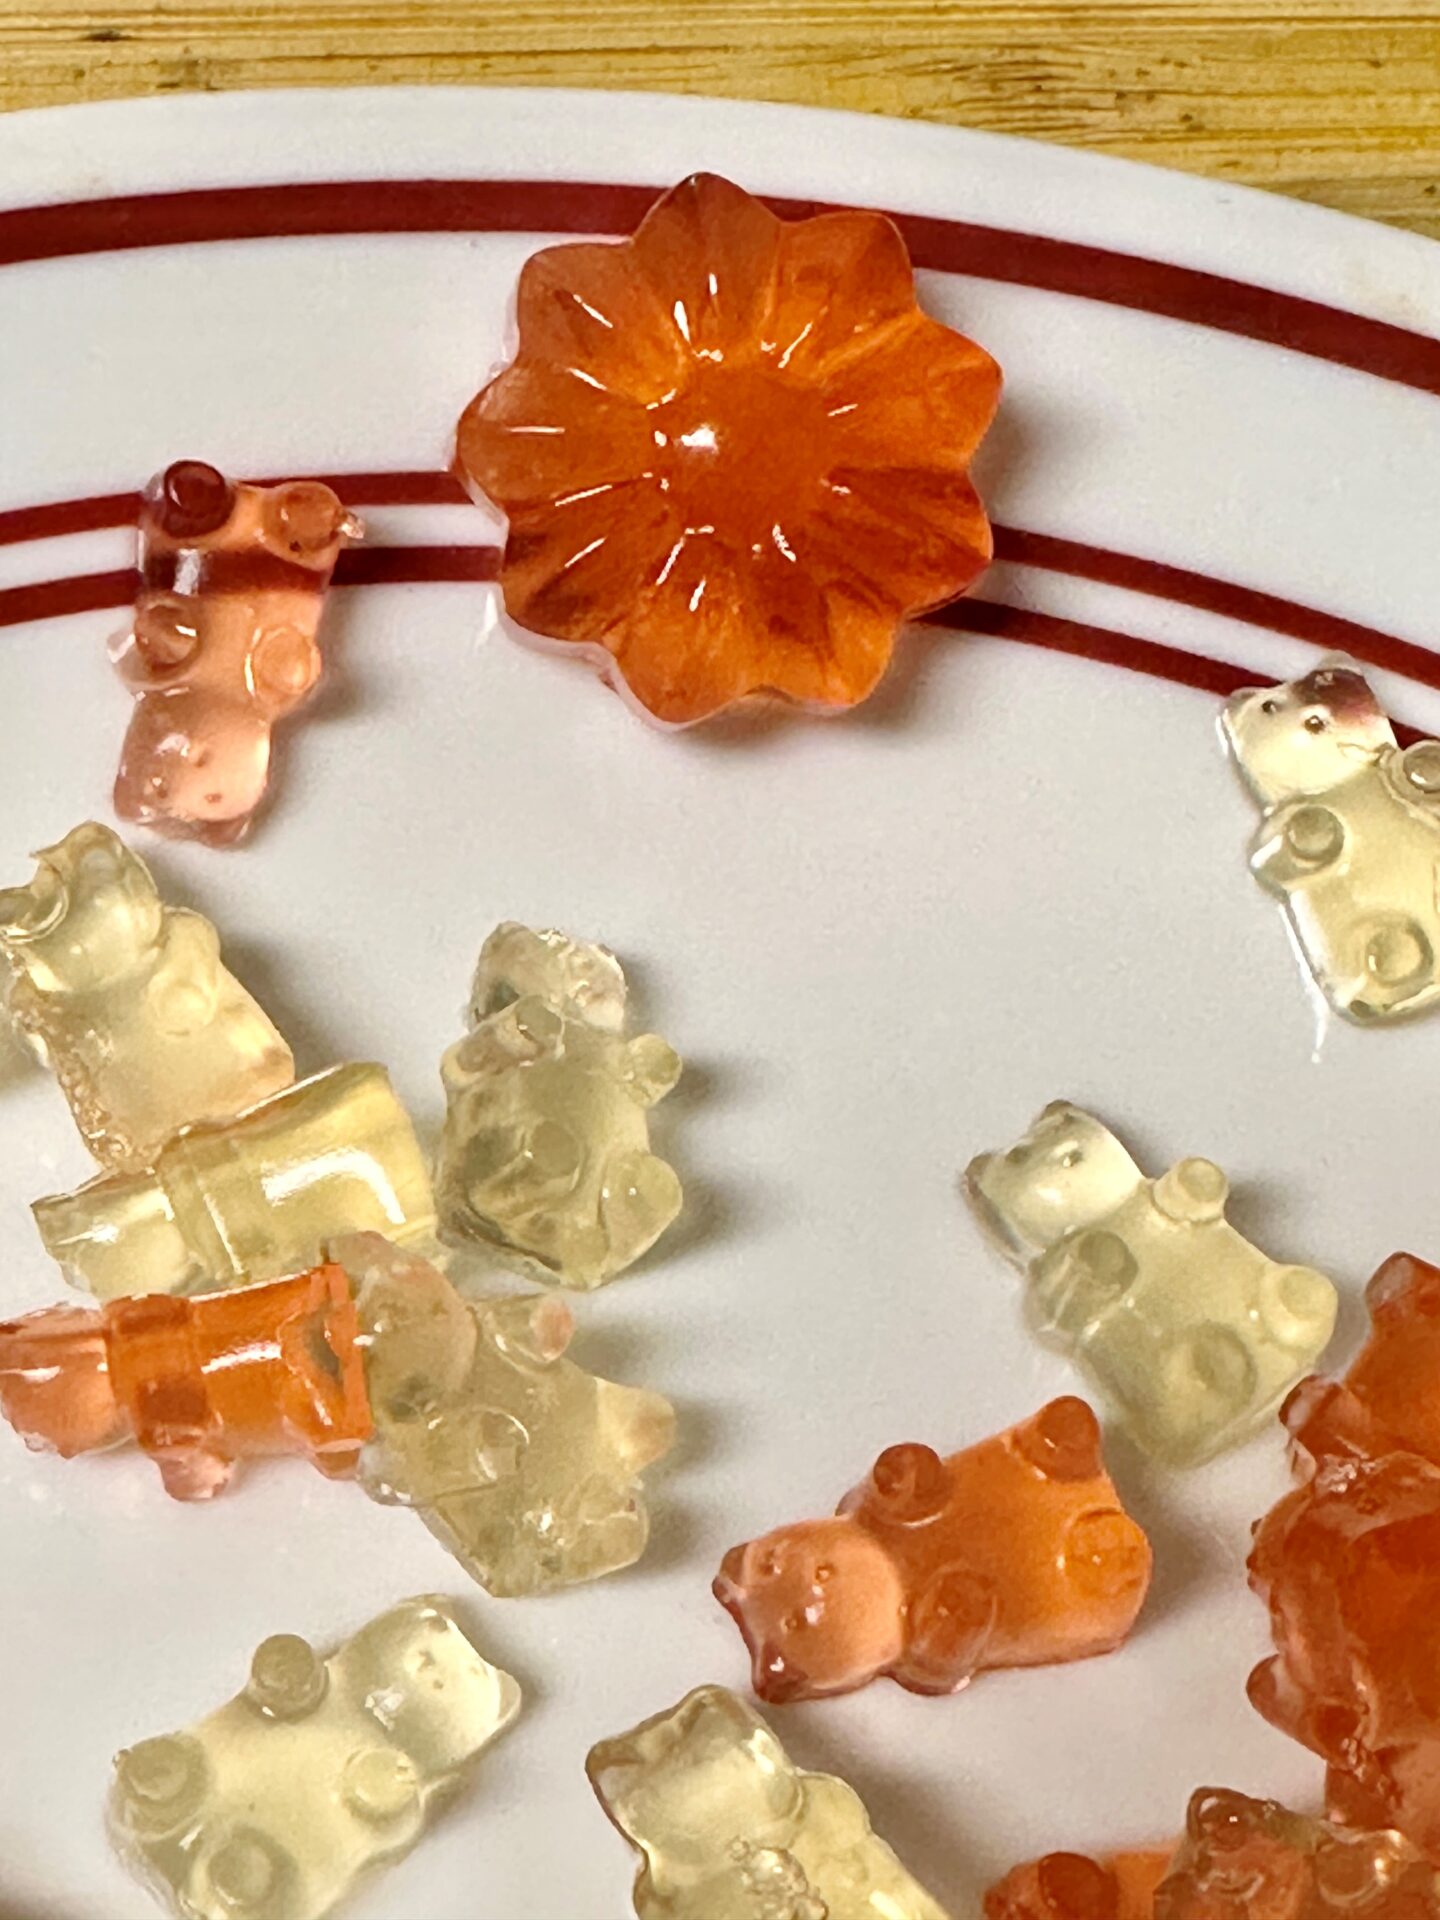 How To Make A Healthy 3 Ingredient Gummy Bear At Home